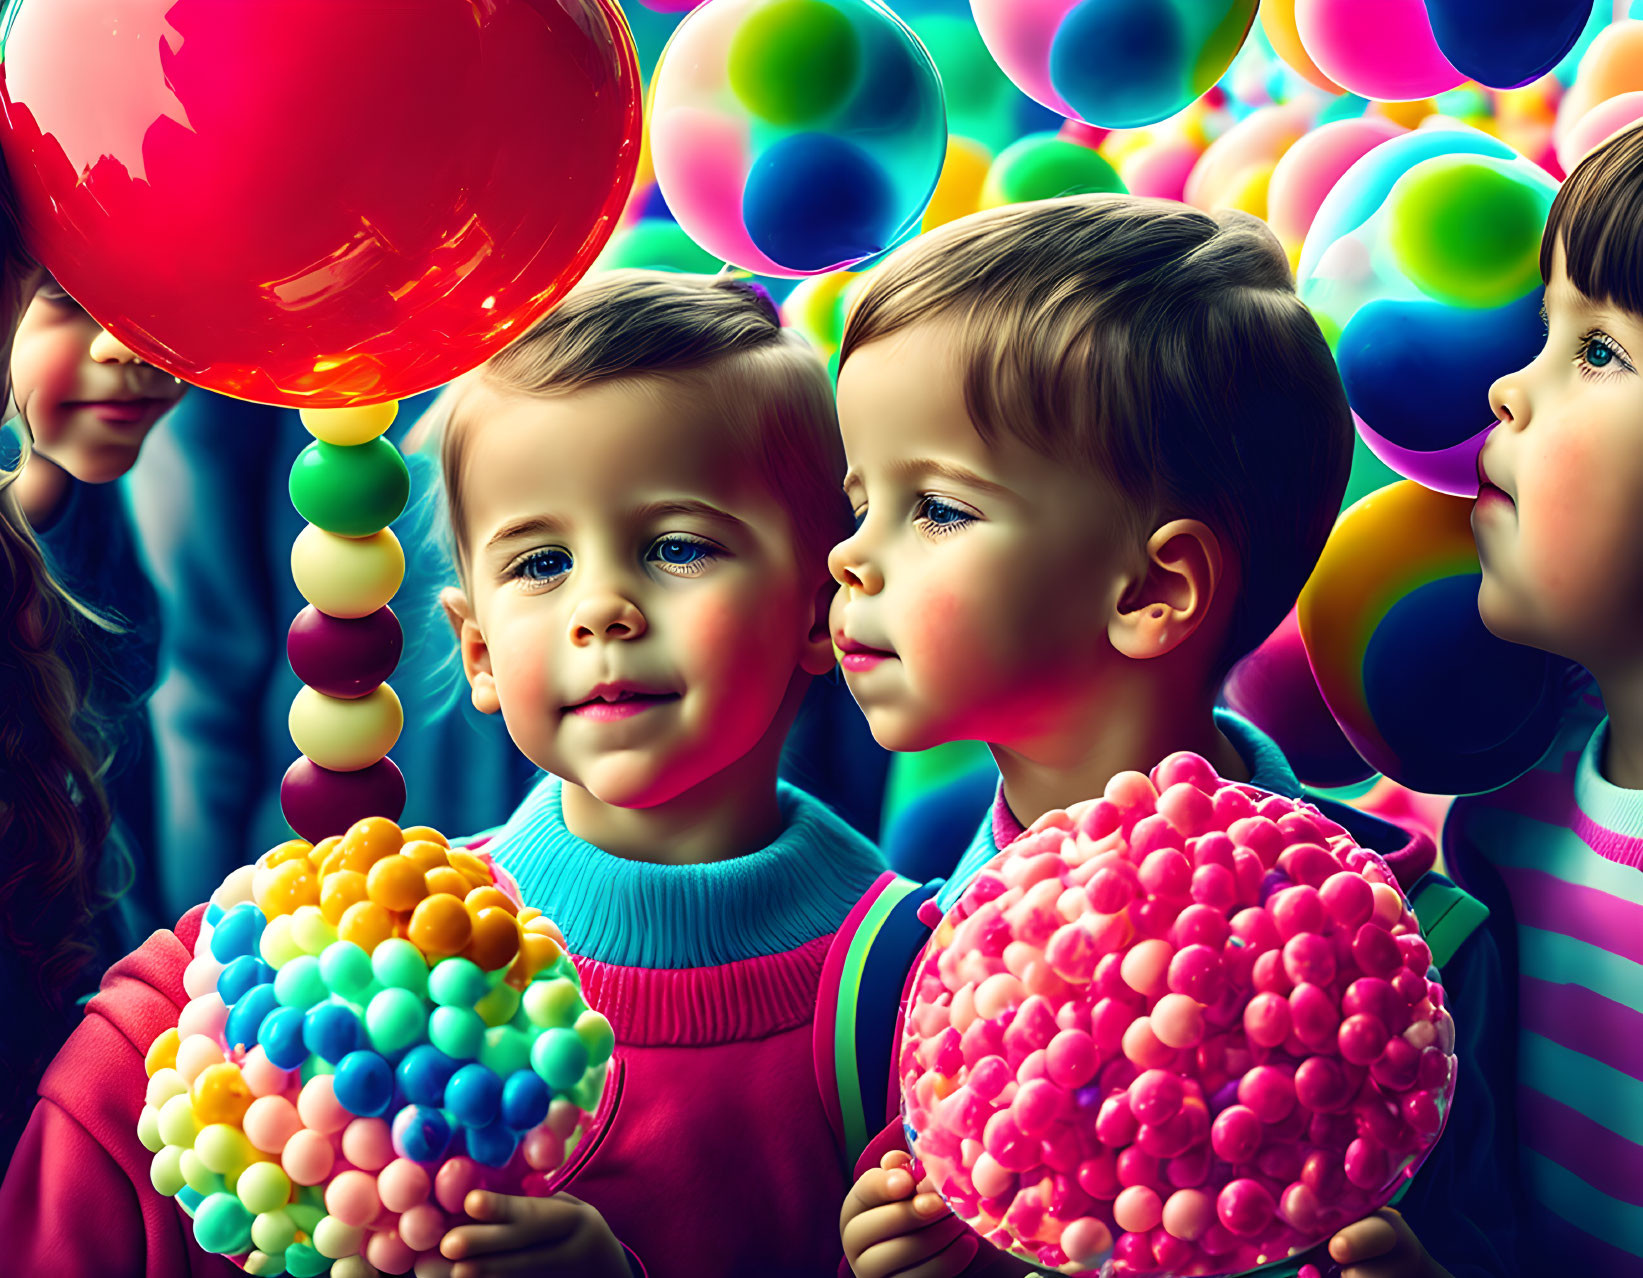 Children holding colorful ball-shaped objects in vibrant background